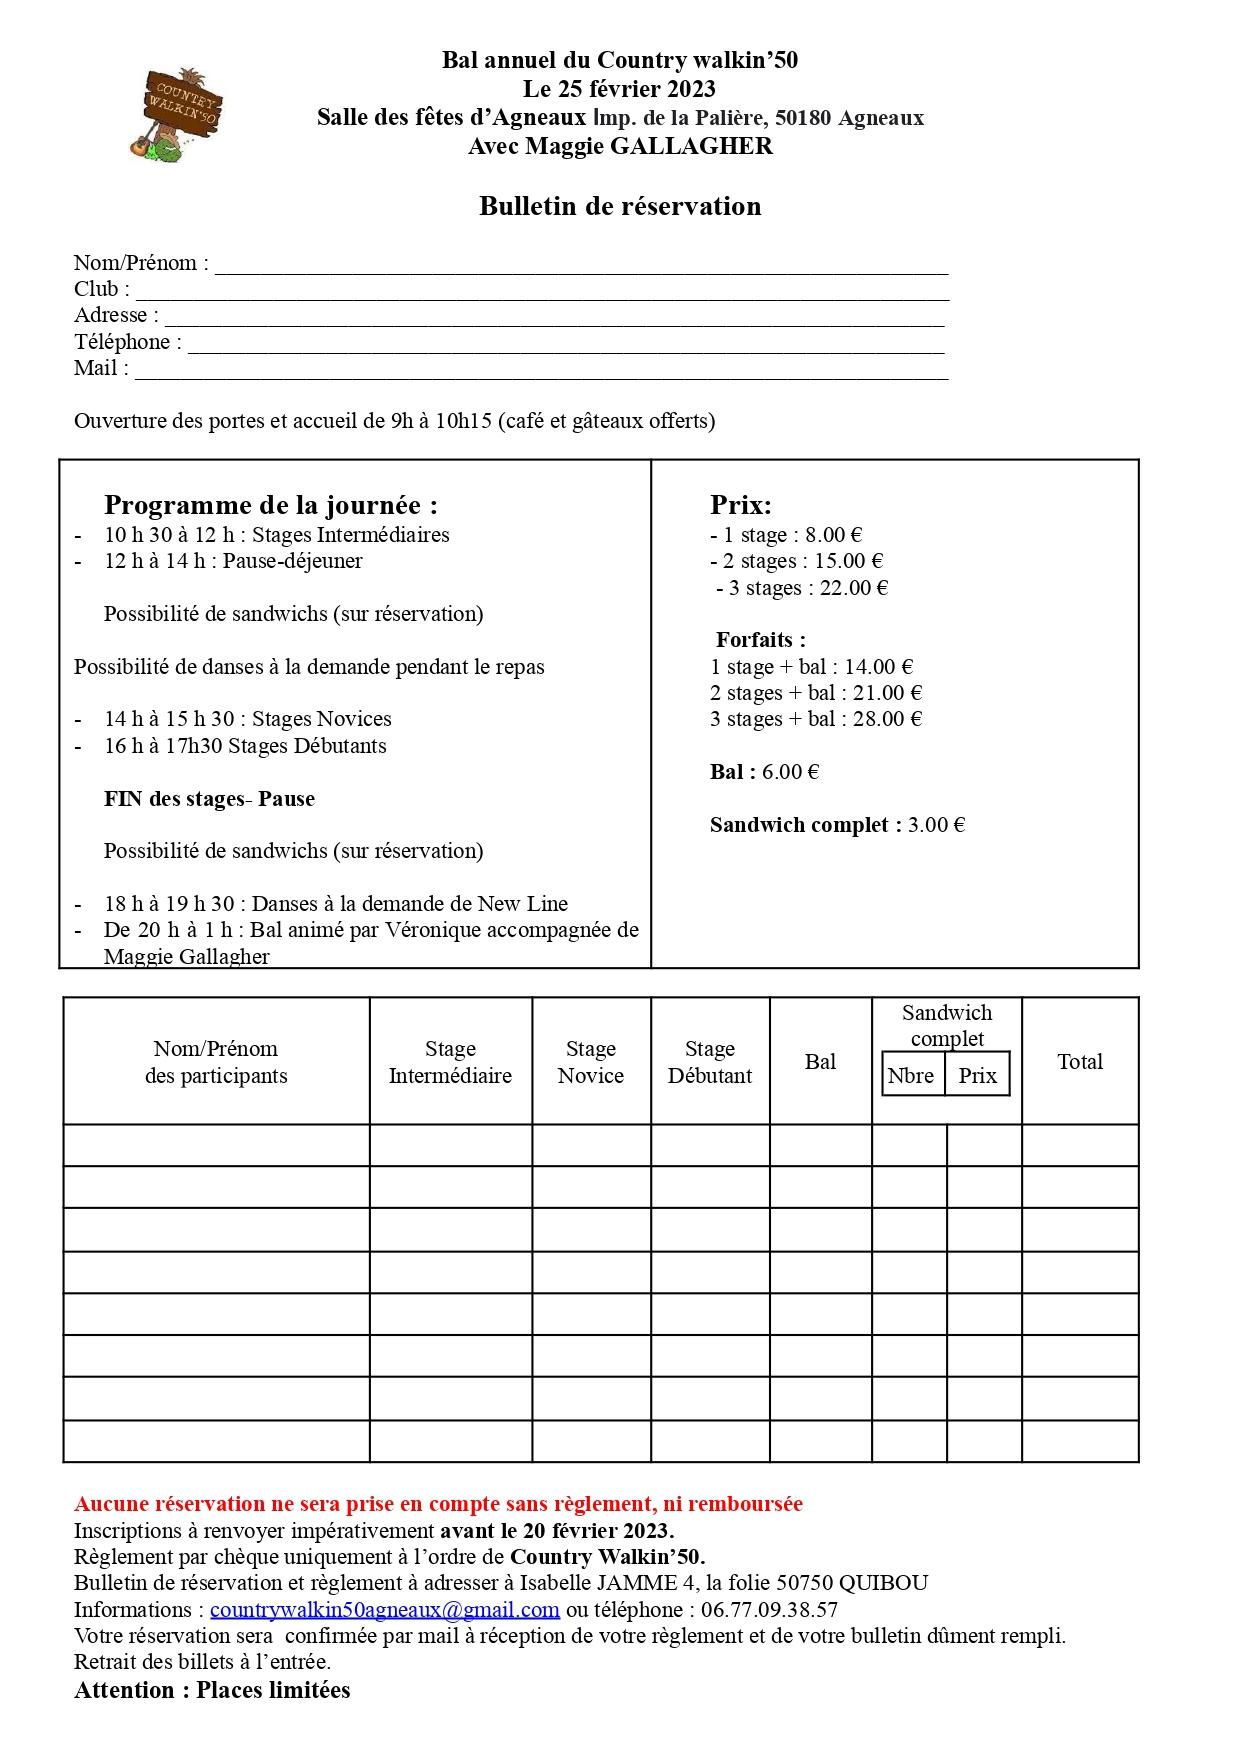 Bulletin reservation 25 02 23 docx page 2